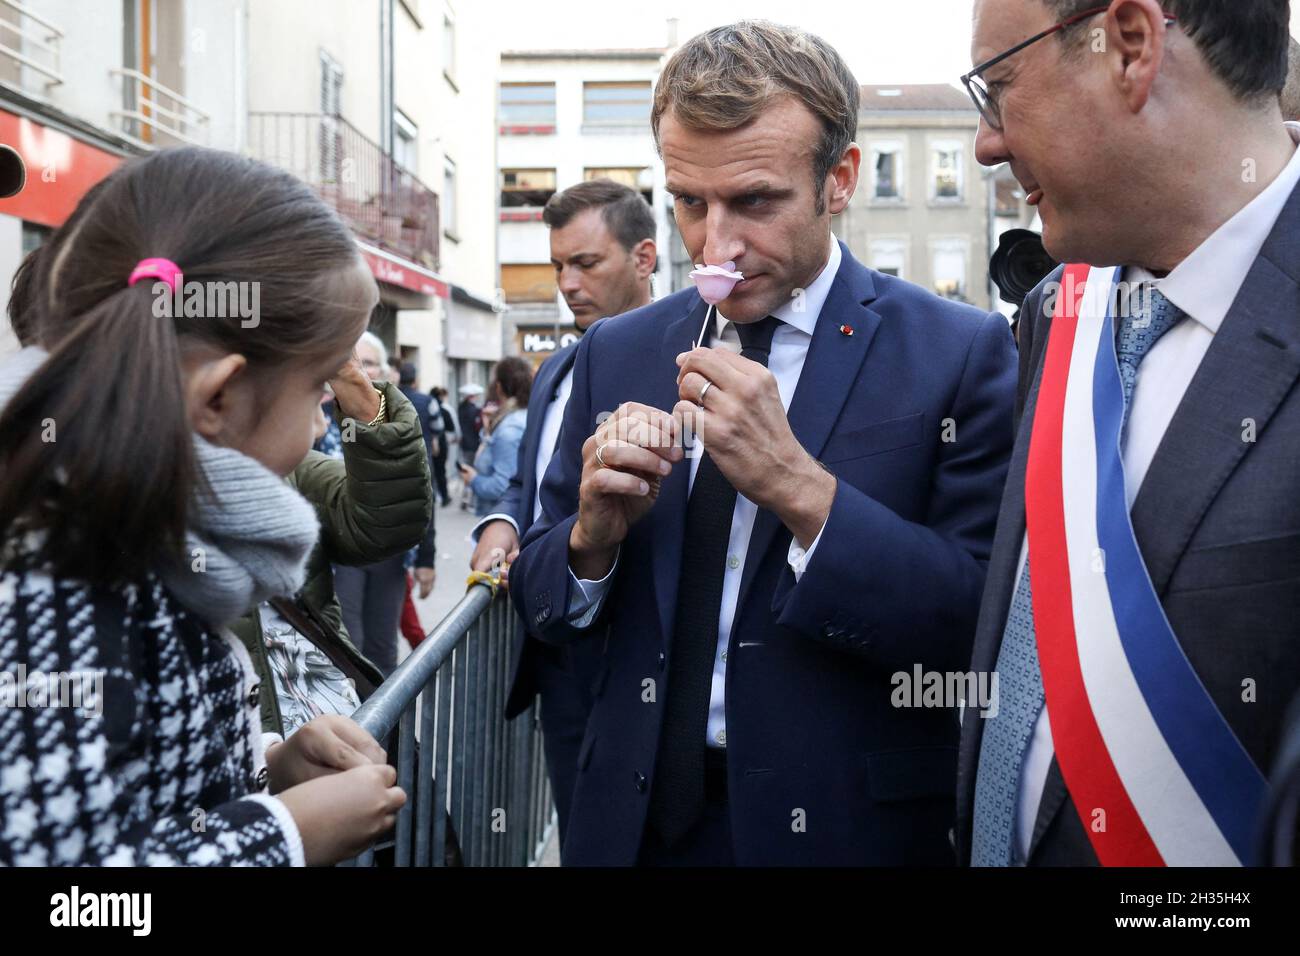 French President Emmanuel Macron is given a rose by a young girl during a  visit in Montbrison, central-eastern France, on October 25, 2021. Photo by  Stephane Lemouton/Pool/ABACAPRESS.COM Stock Photo - Alamy